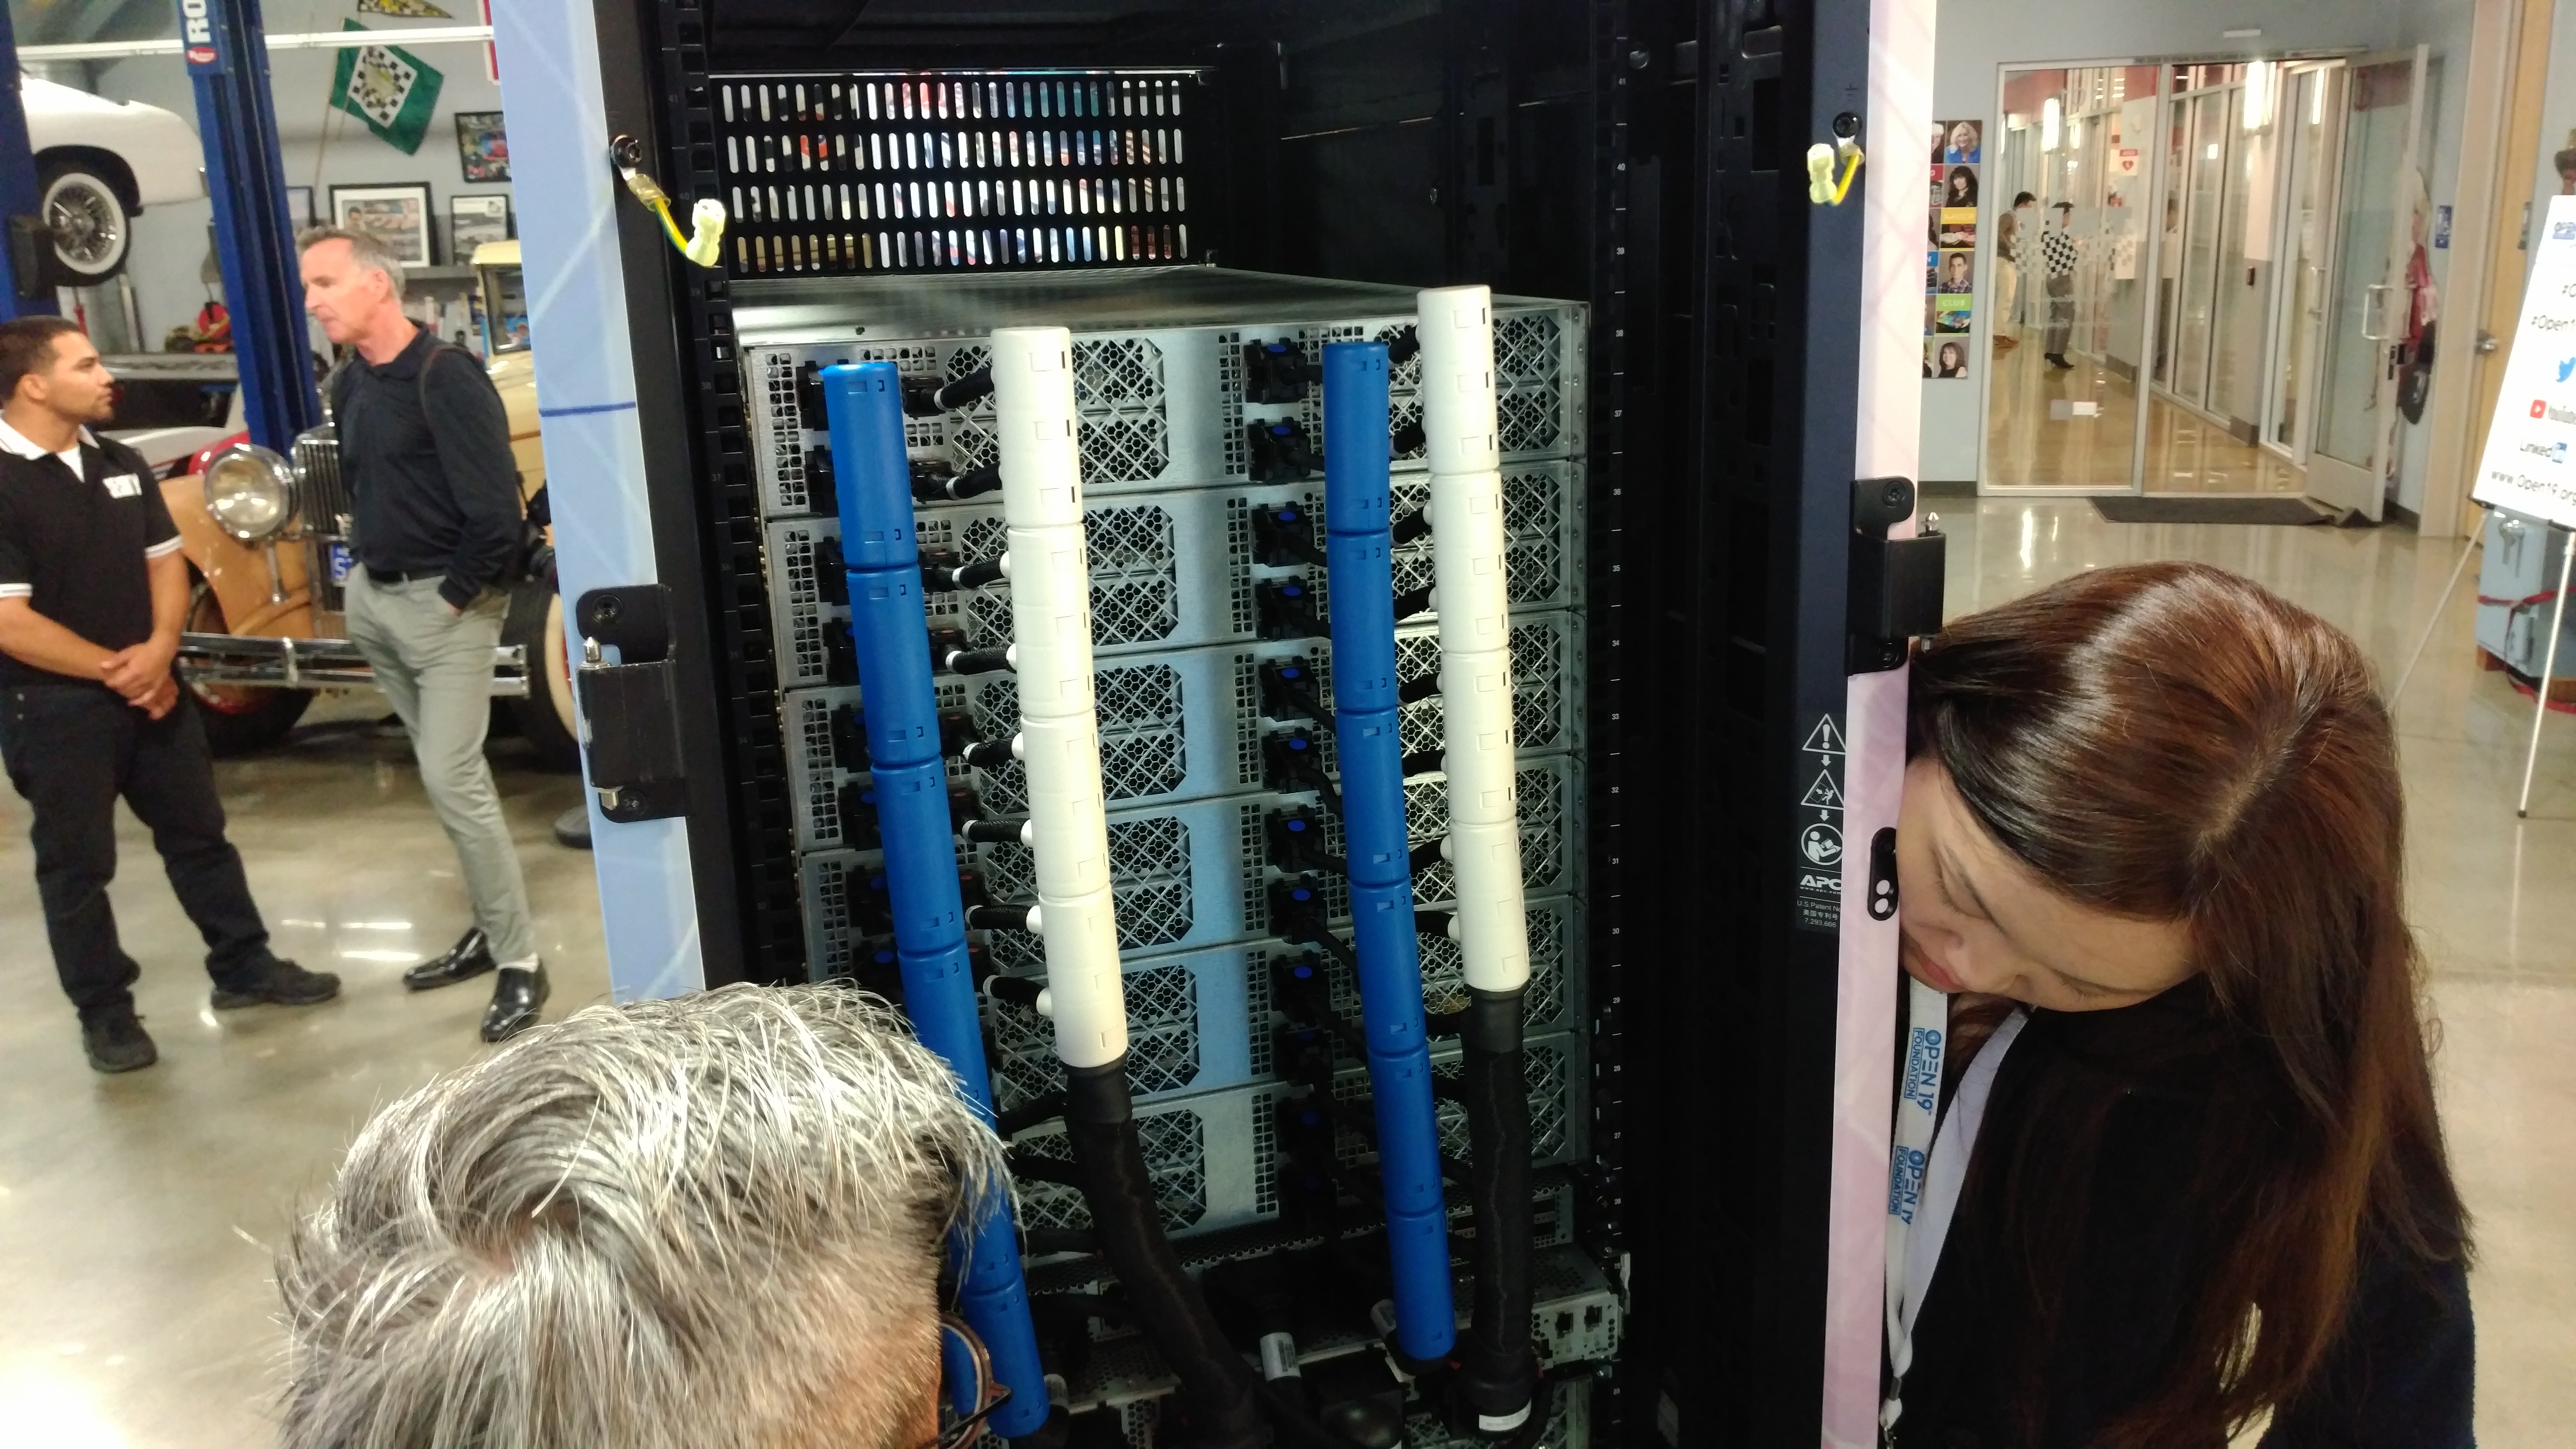 The Open19 cabling system on display at the Open19 Foundation Summit 2019